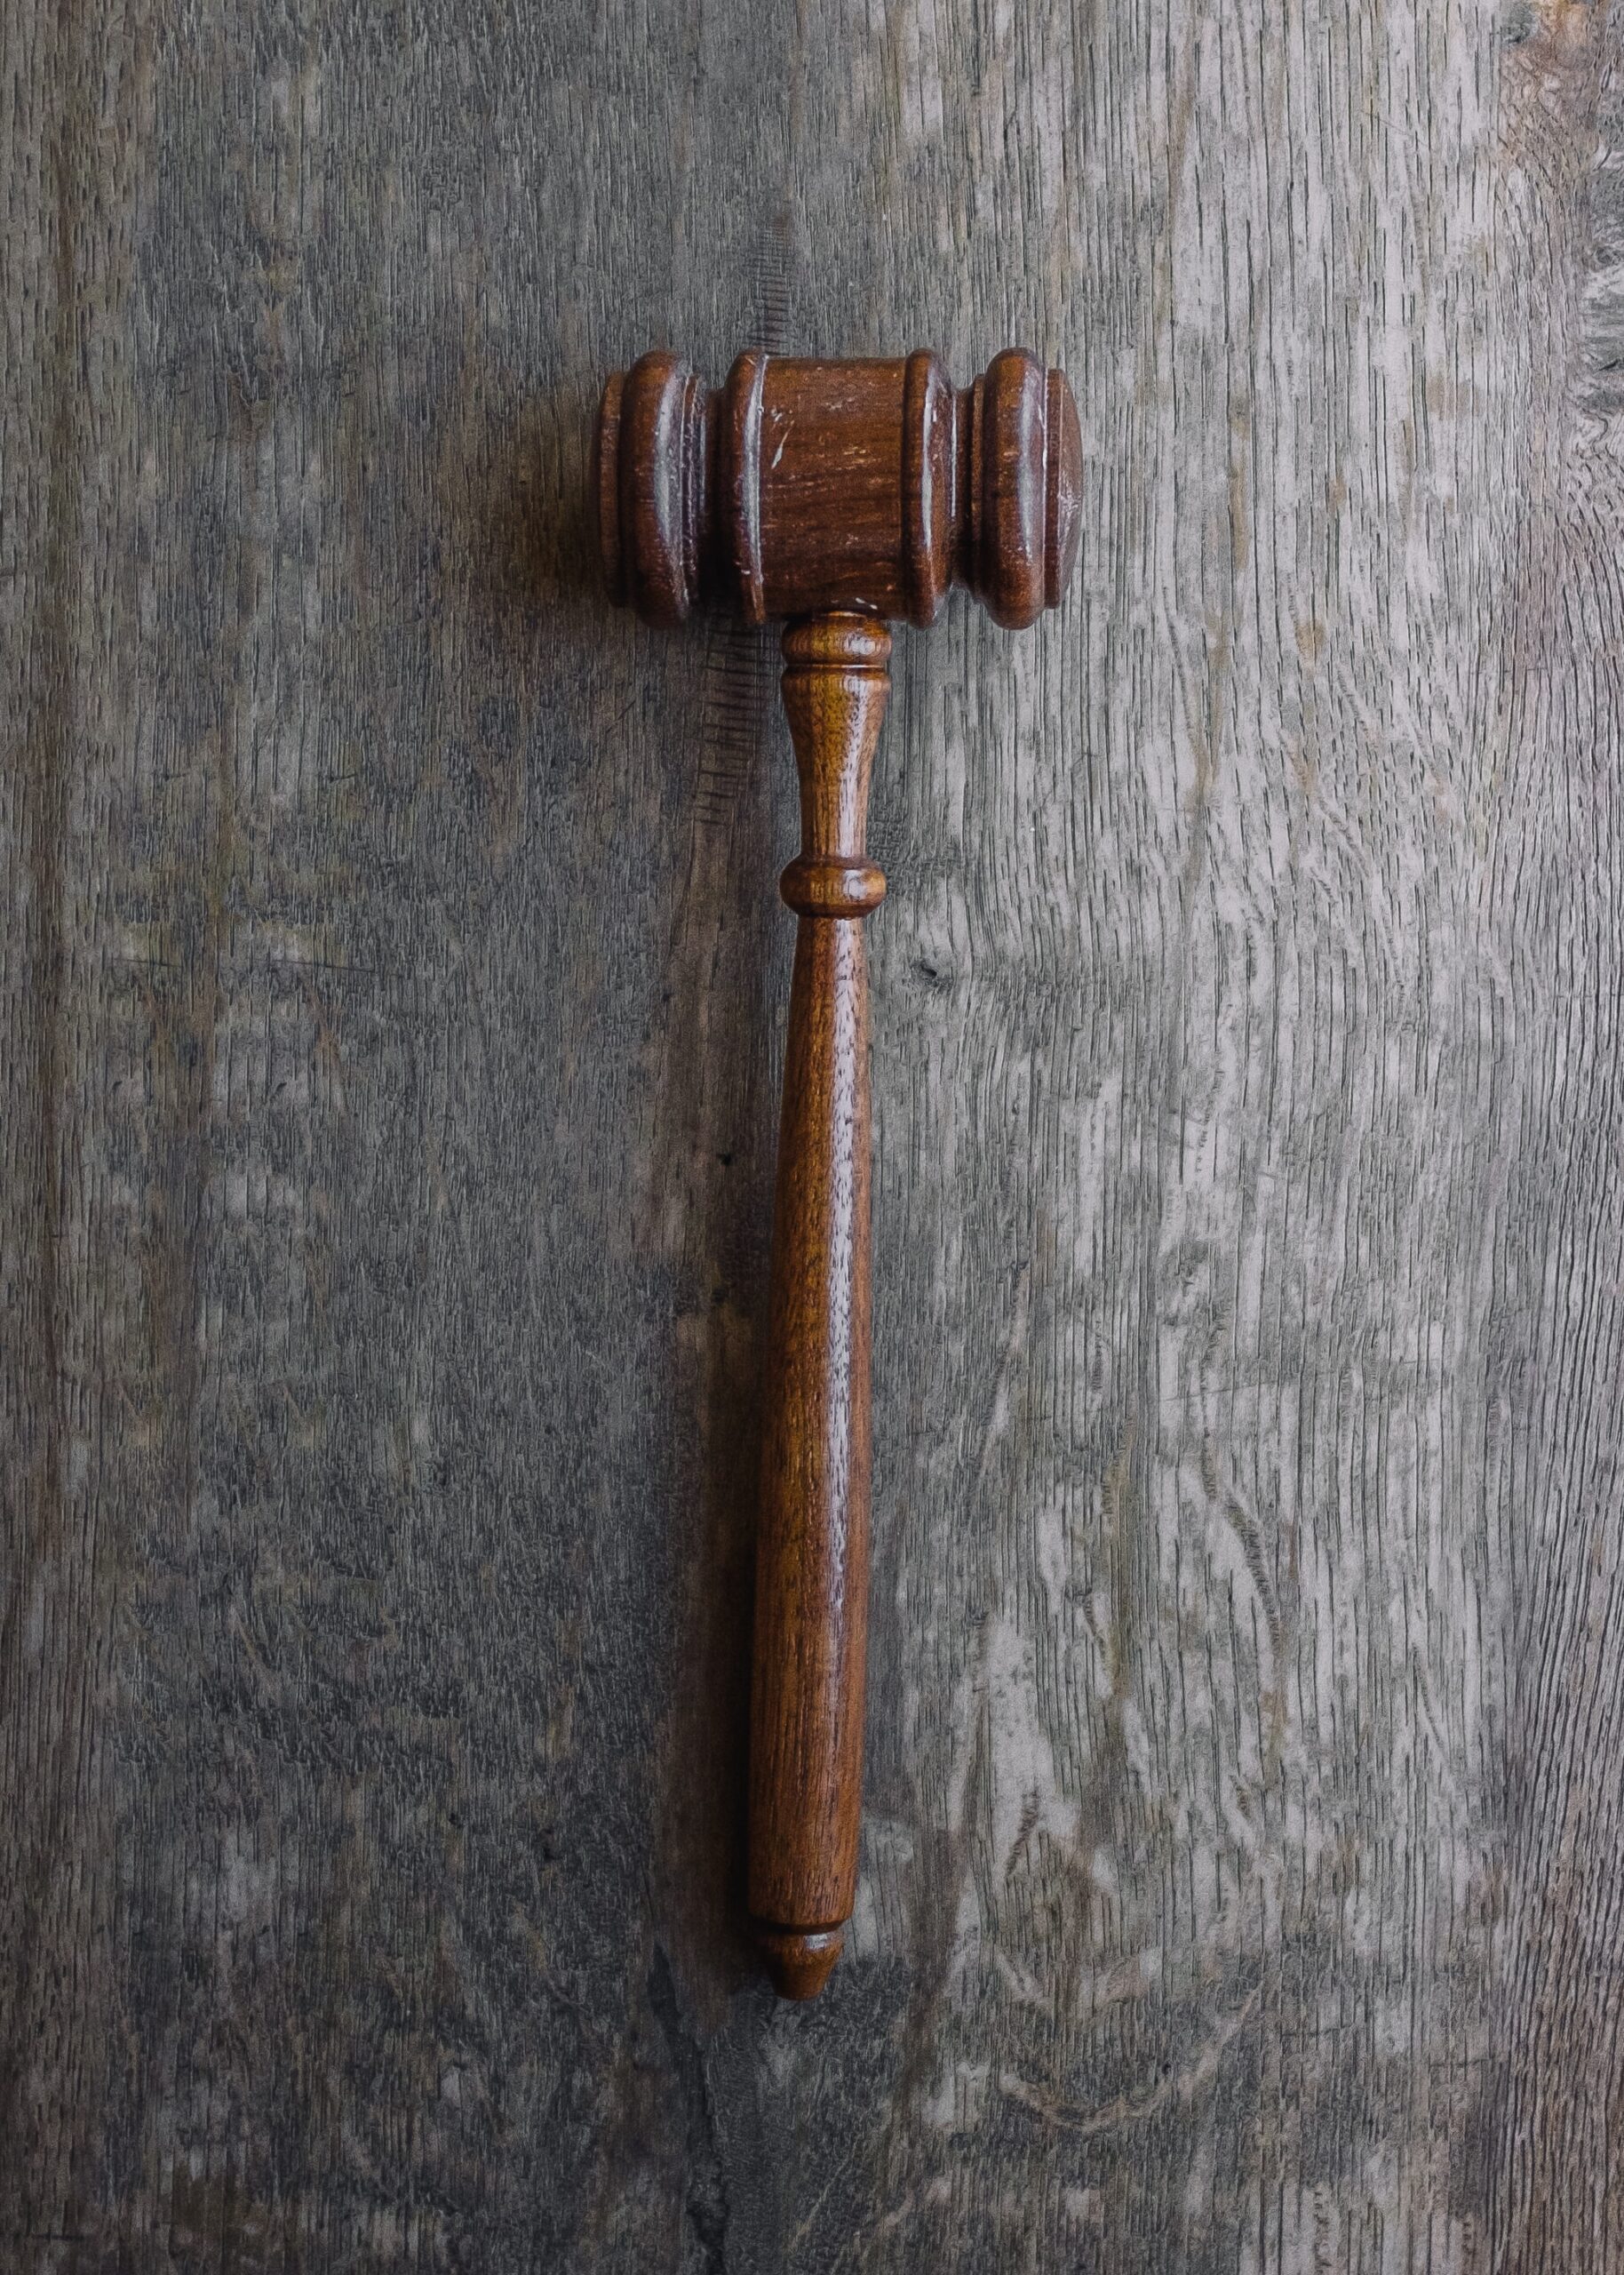 gavel used in court